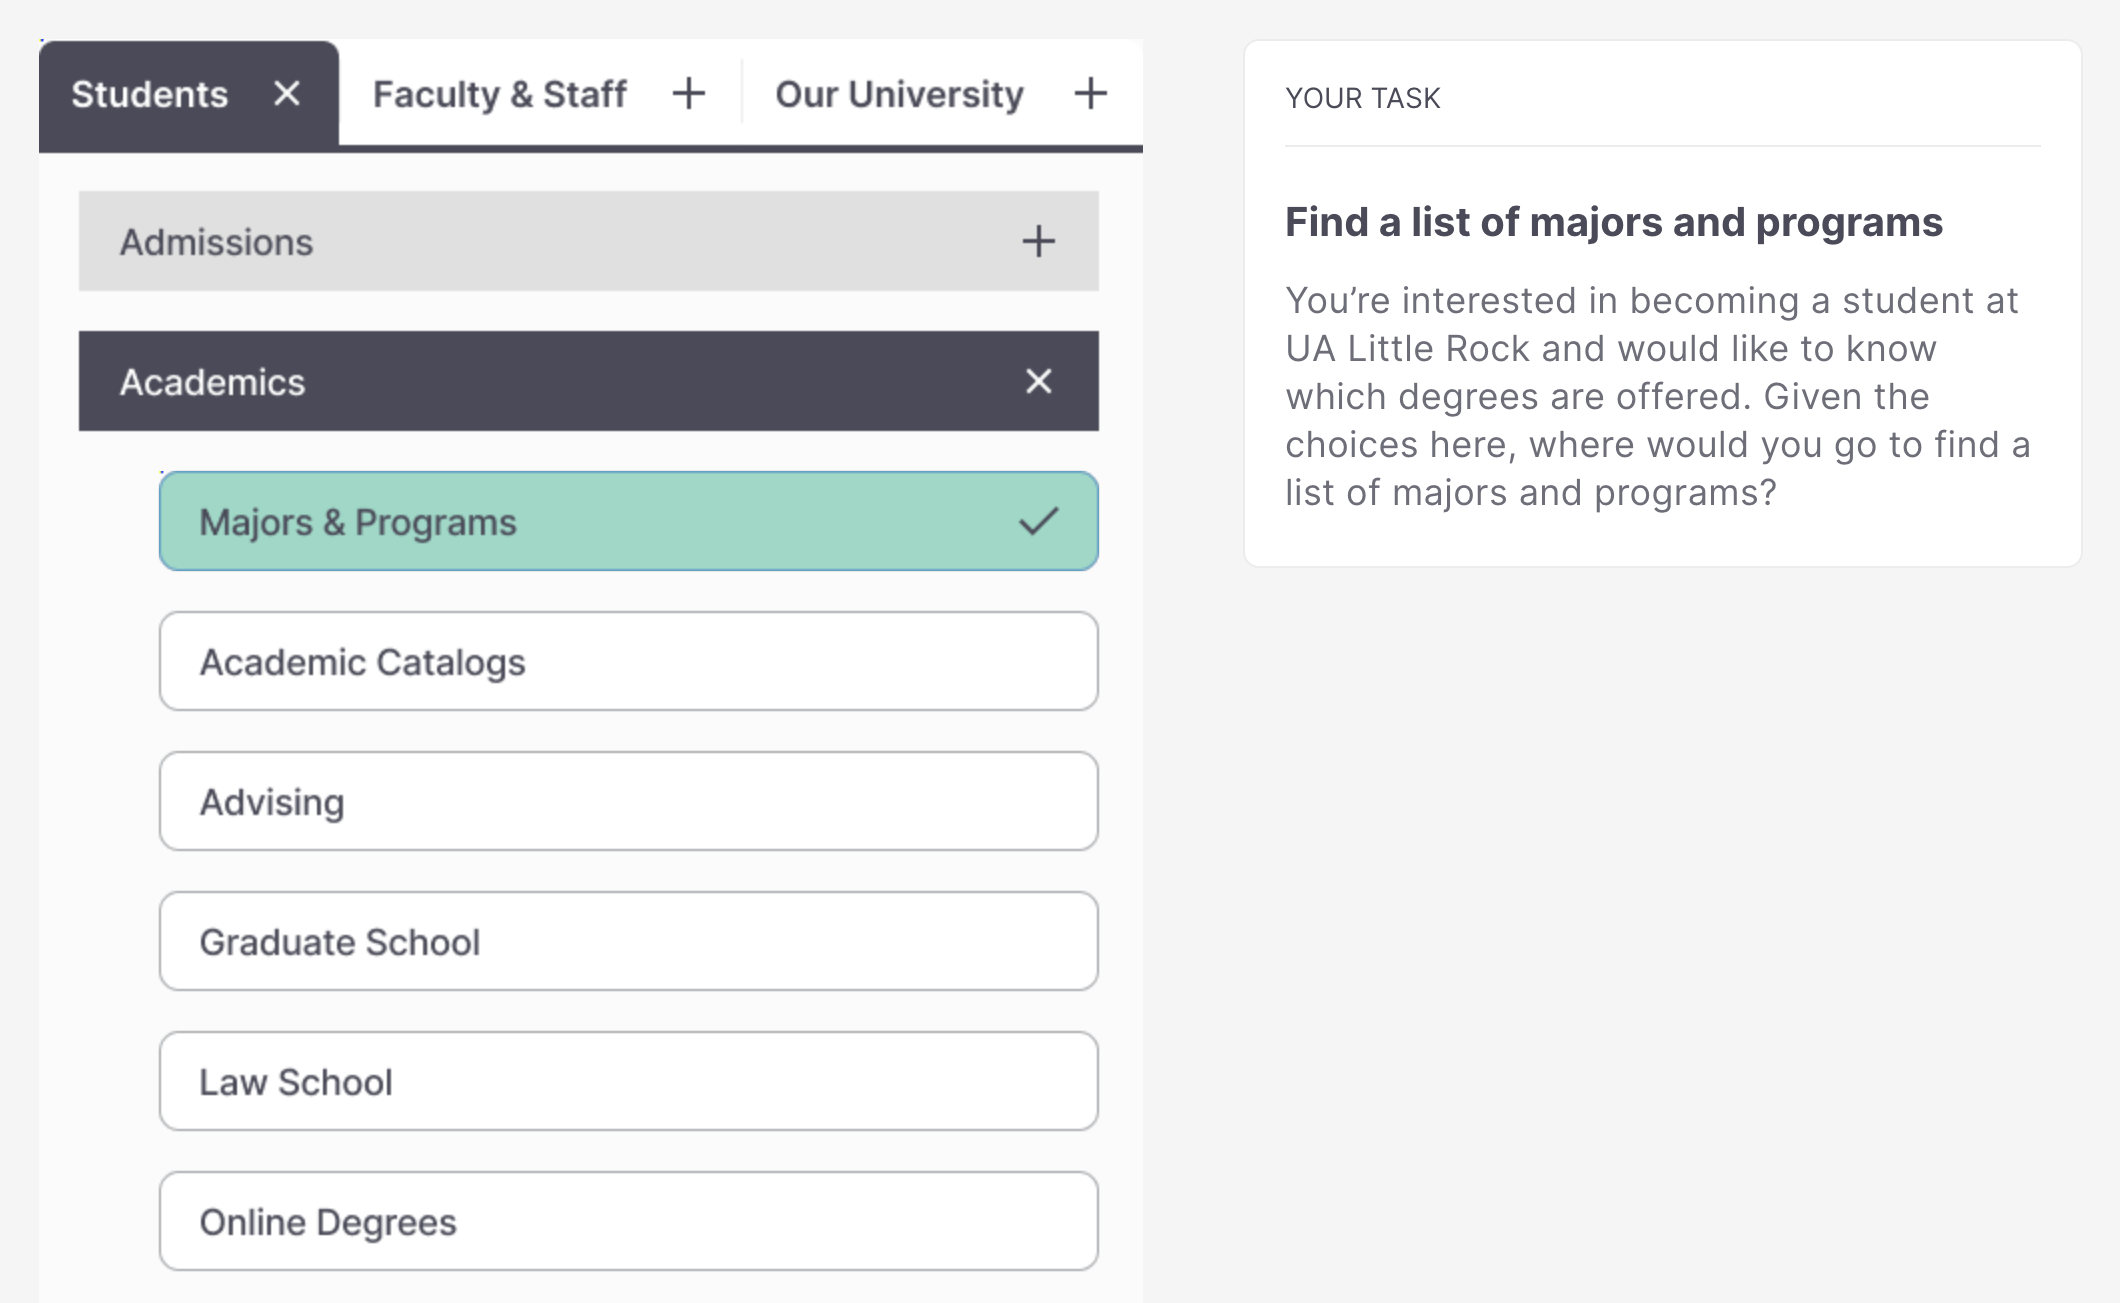 A screenshot of a task in Tree Test D. The instructions say, "Find a list of majors and programs. You’re interested in becoming a student at UA Little Rock and would like to know which degrees are offered. Given the choices here, where would you go to find a list of majors and programs?" The accompanying interface has a menu of options, in which "Students", then "Academics," then "Majors &amp; Programs" is selected.